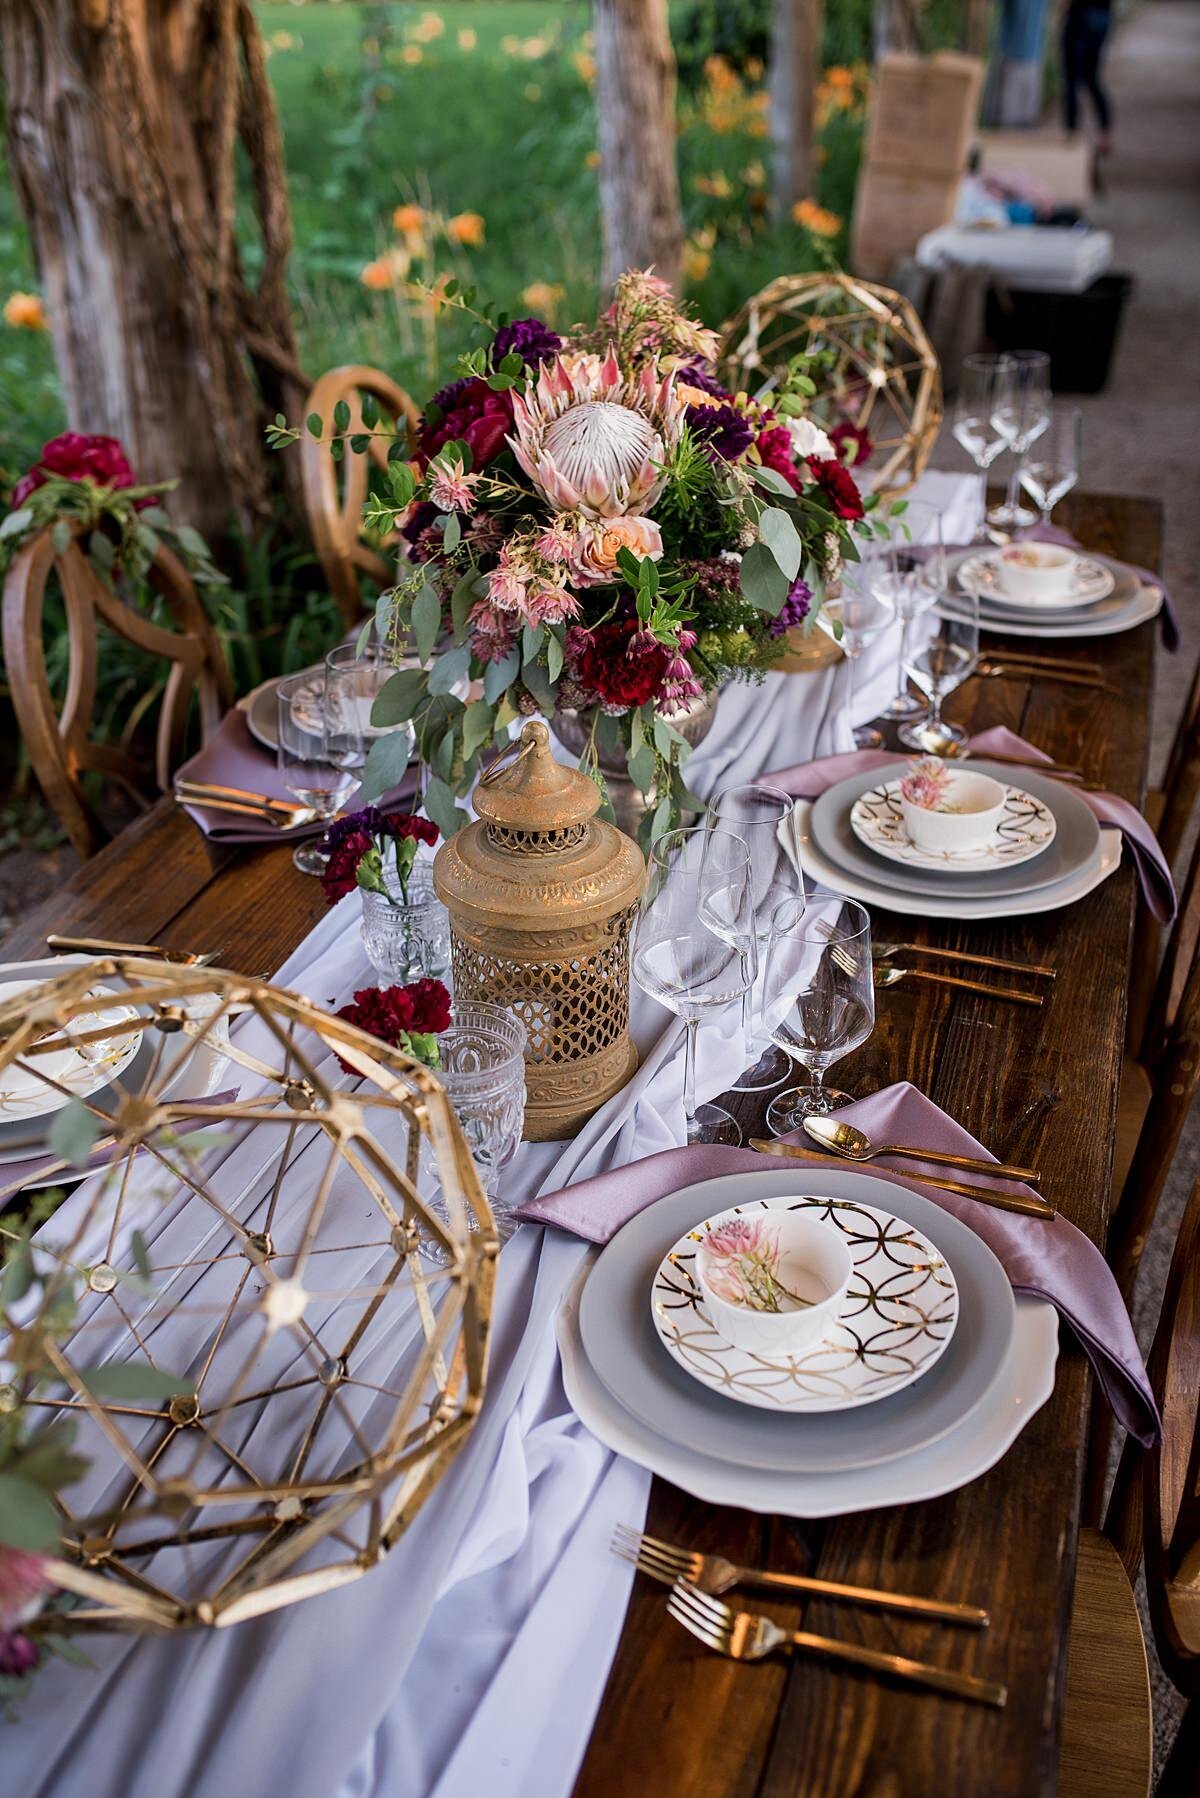 Dark wood farm table with soft gray organza table runner, gold moroccan lanterns and large gold geometric spheres with a large floral centerpiece. The centerpiece is in a gold footed bowl with king protea, burgundy dahlia, peach tea roses,  silver dollar eucalyptus and greenery. The table is set with gold flatware, a white charger with a scalloped edge, a gray dinner plate and a white salad plate with gold geometric detail. The plates are topped with a white bowl holding a prince protea with a purple napkin. The table is set in a lush garden under an arbor with wisteria.